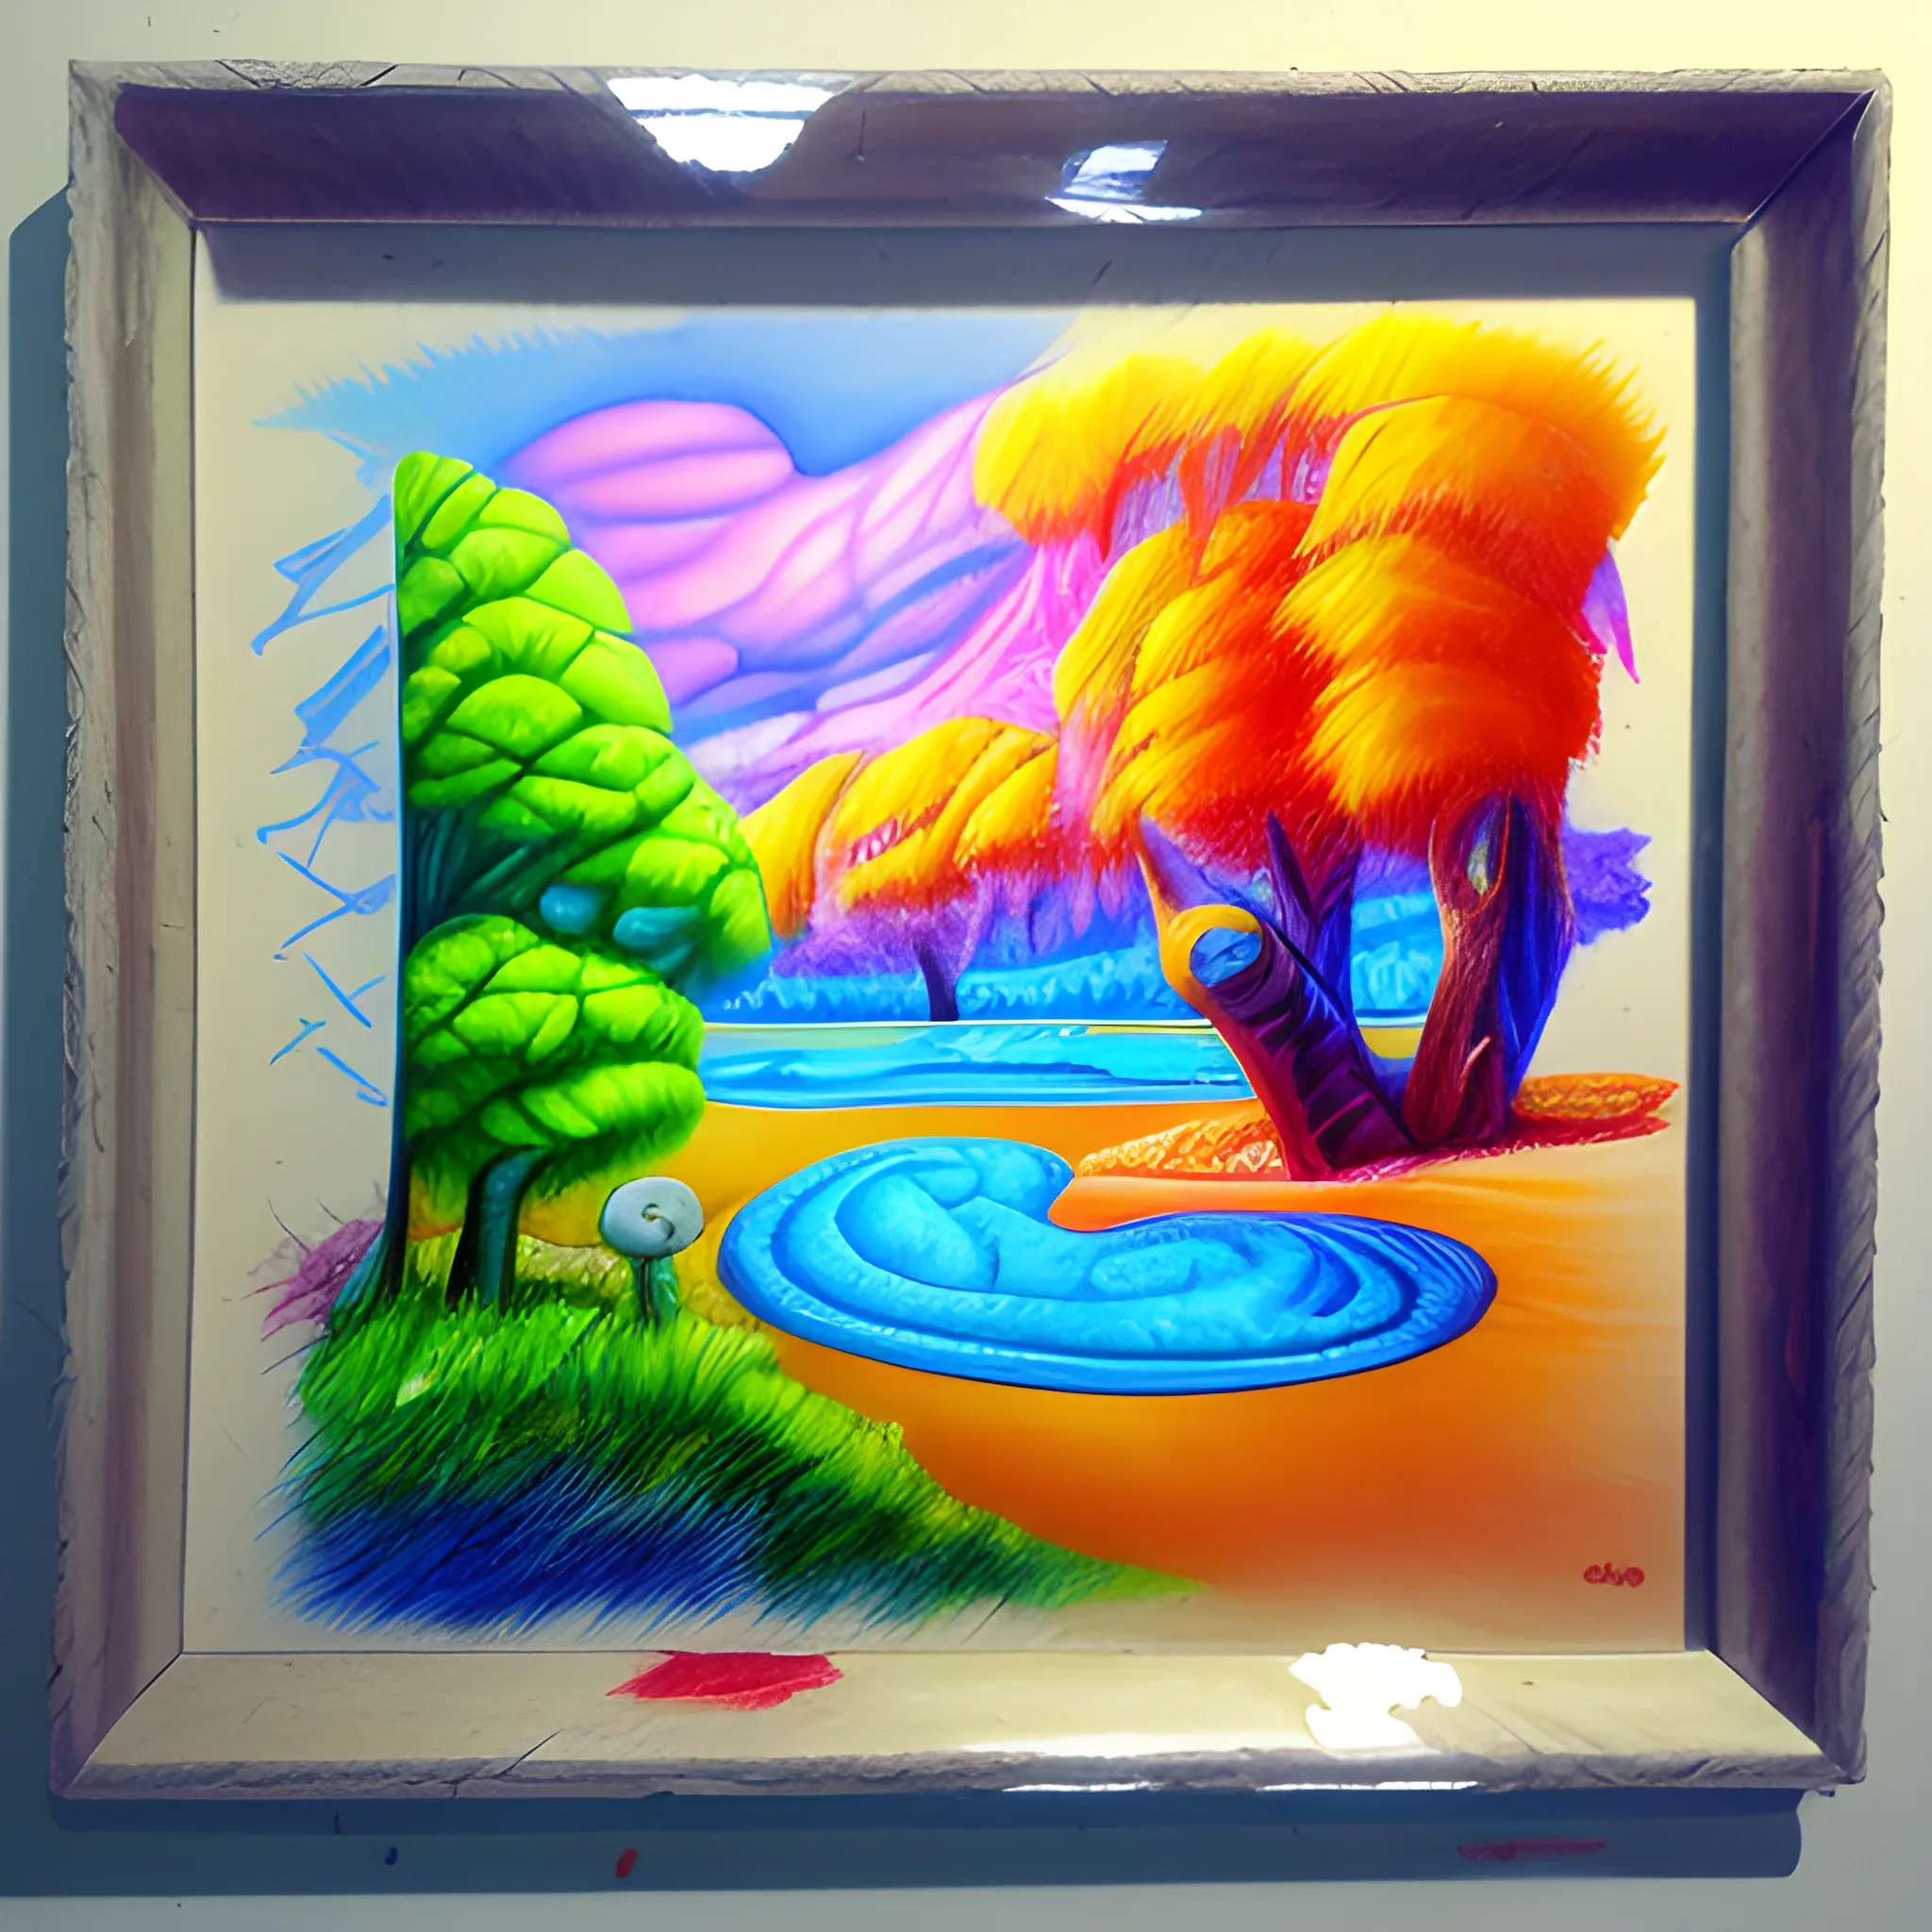 , Trippy, Cartoon, 3D, Oil Painting, Water Color, Pencil Sketch, Oil Painting